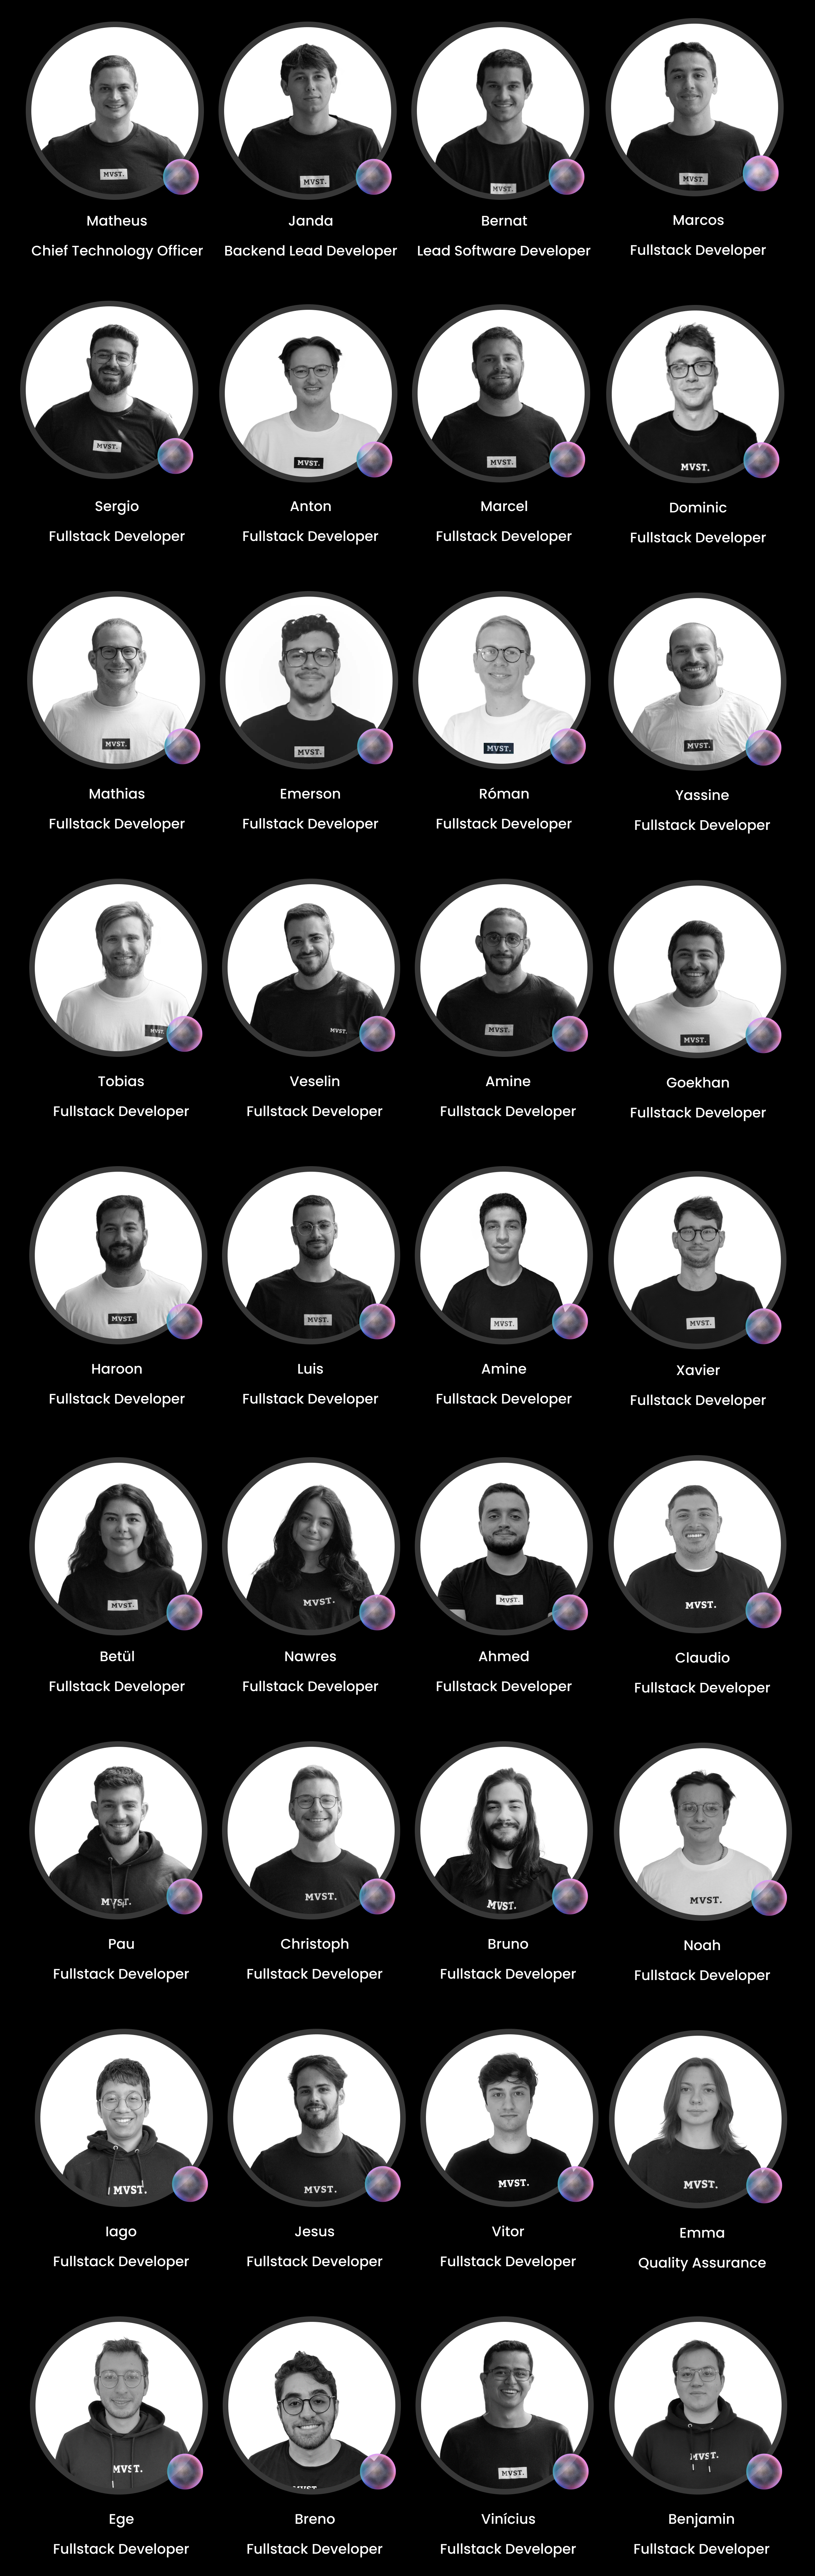 Photos, Names, and Roles of the Developers Team at MVST